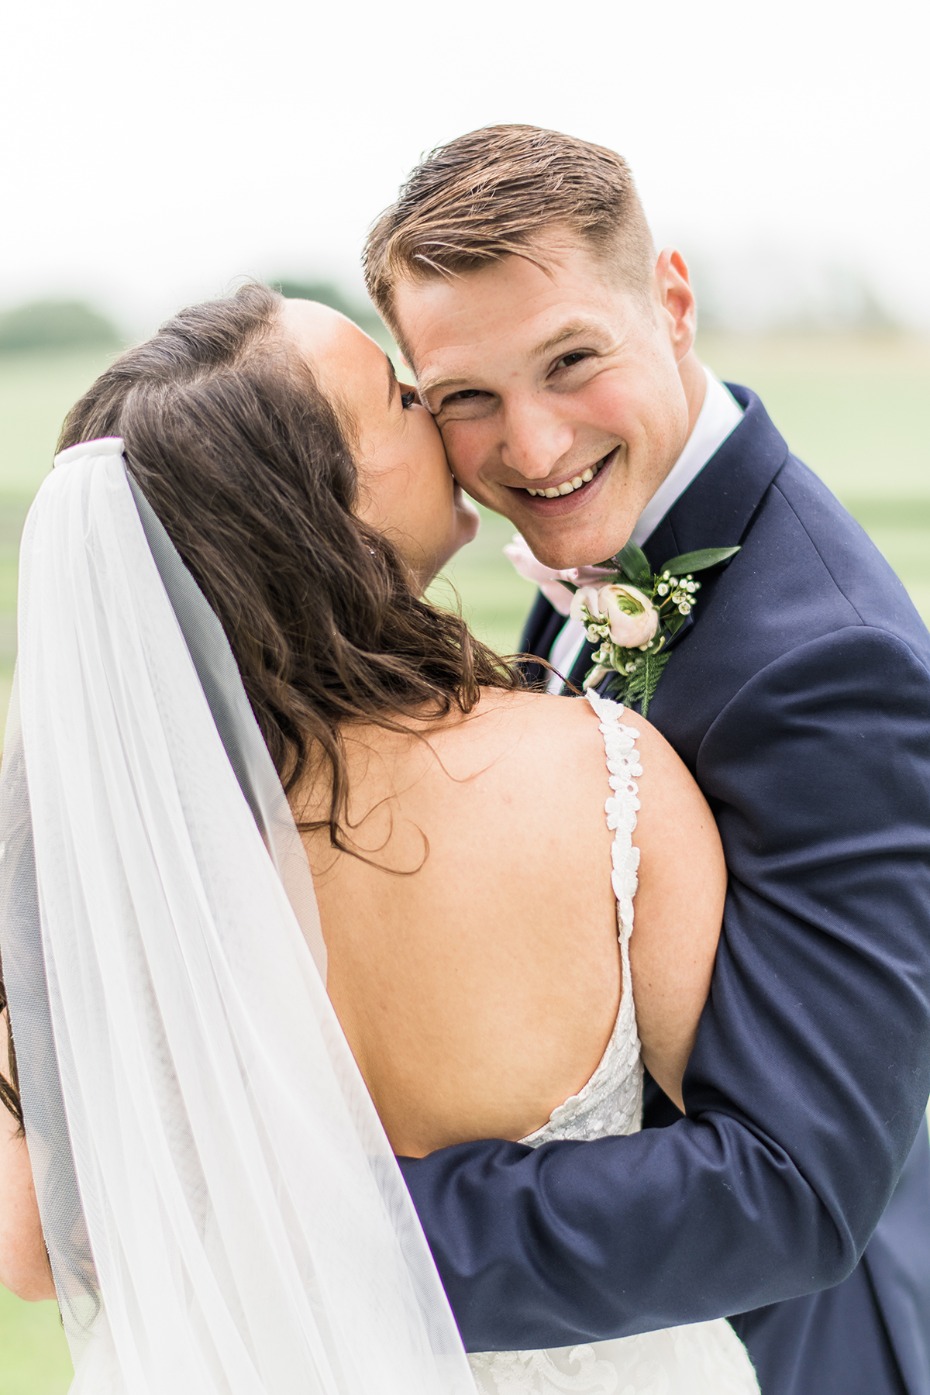 this groom couldn't be happier